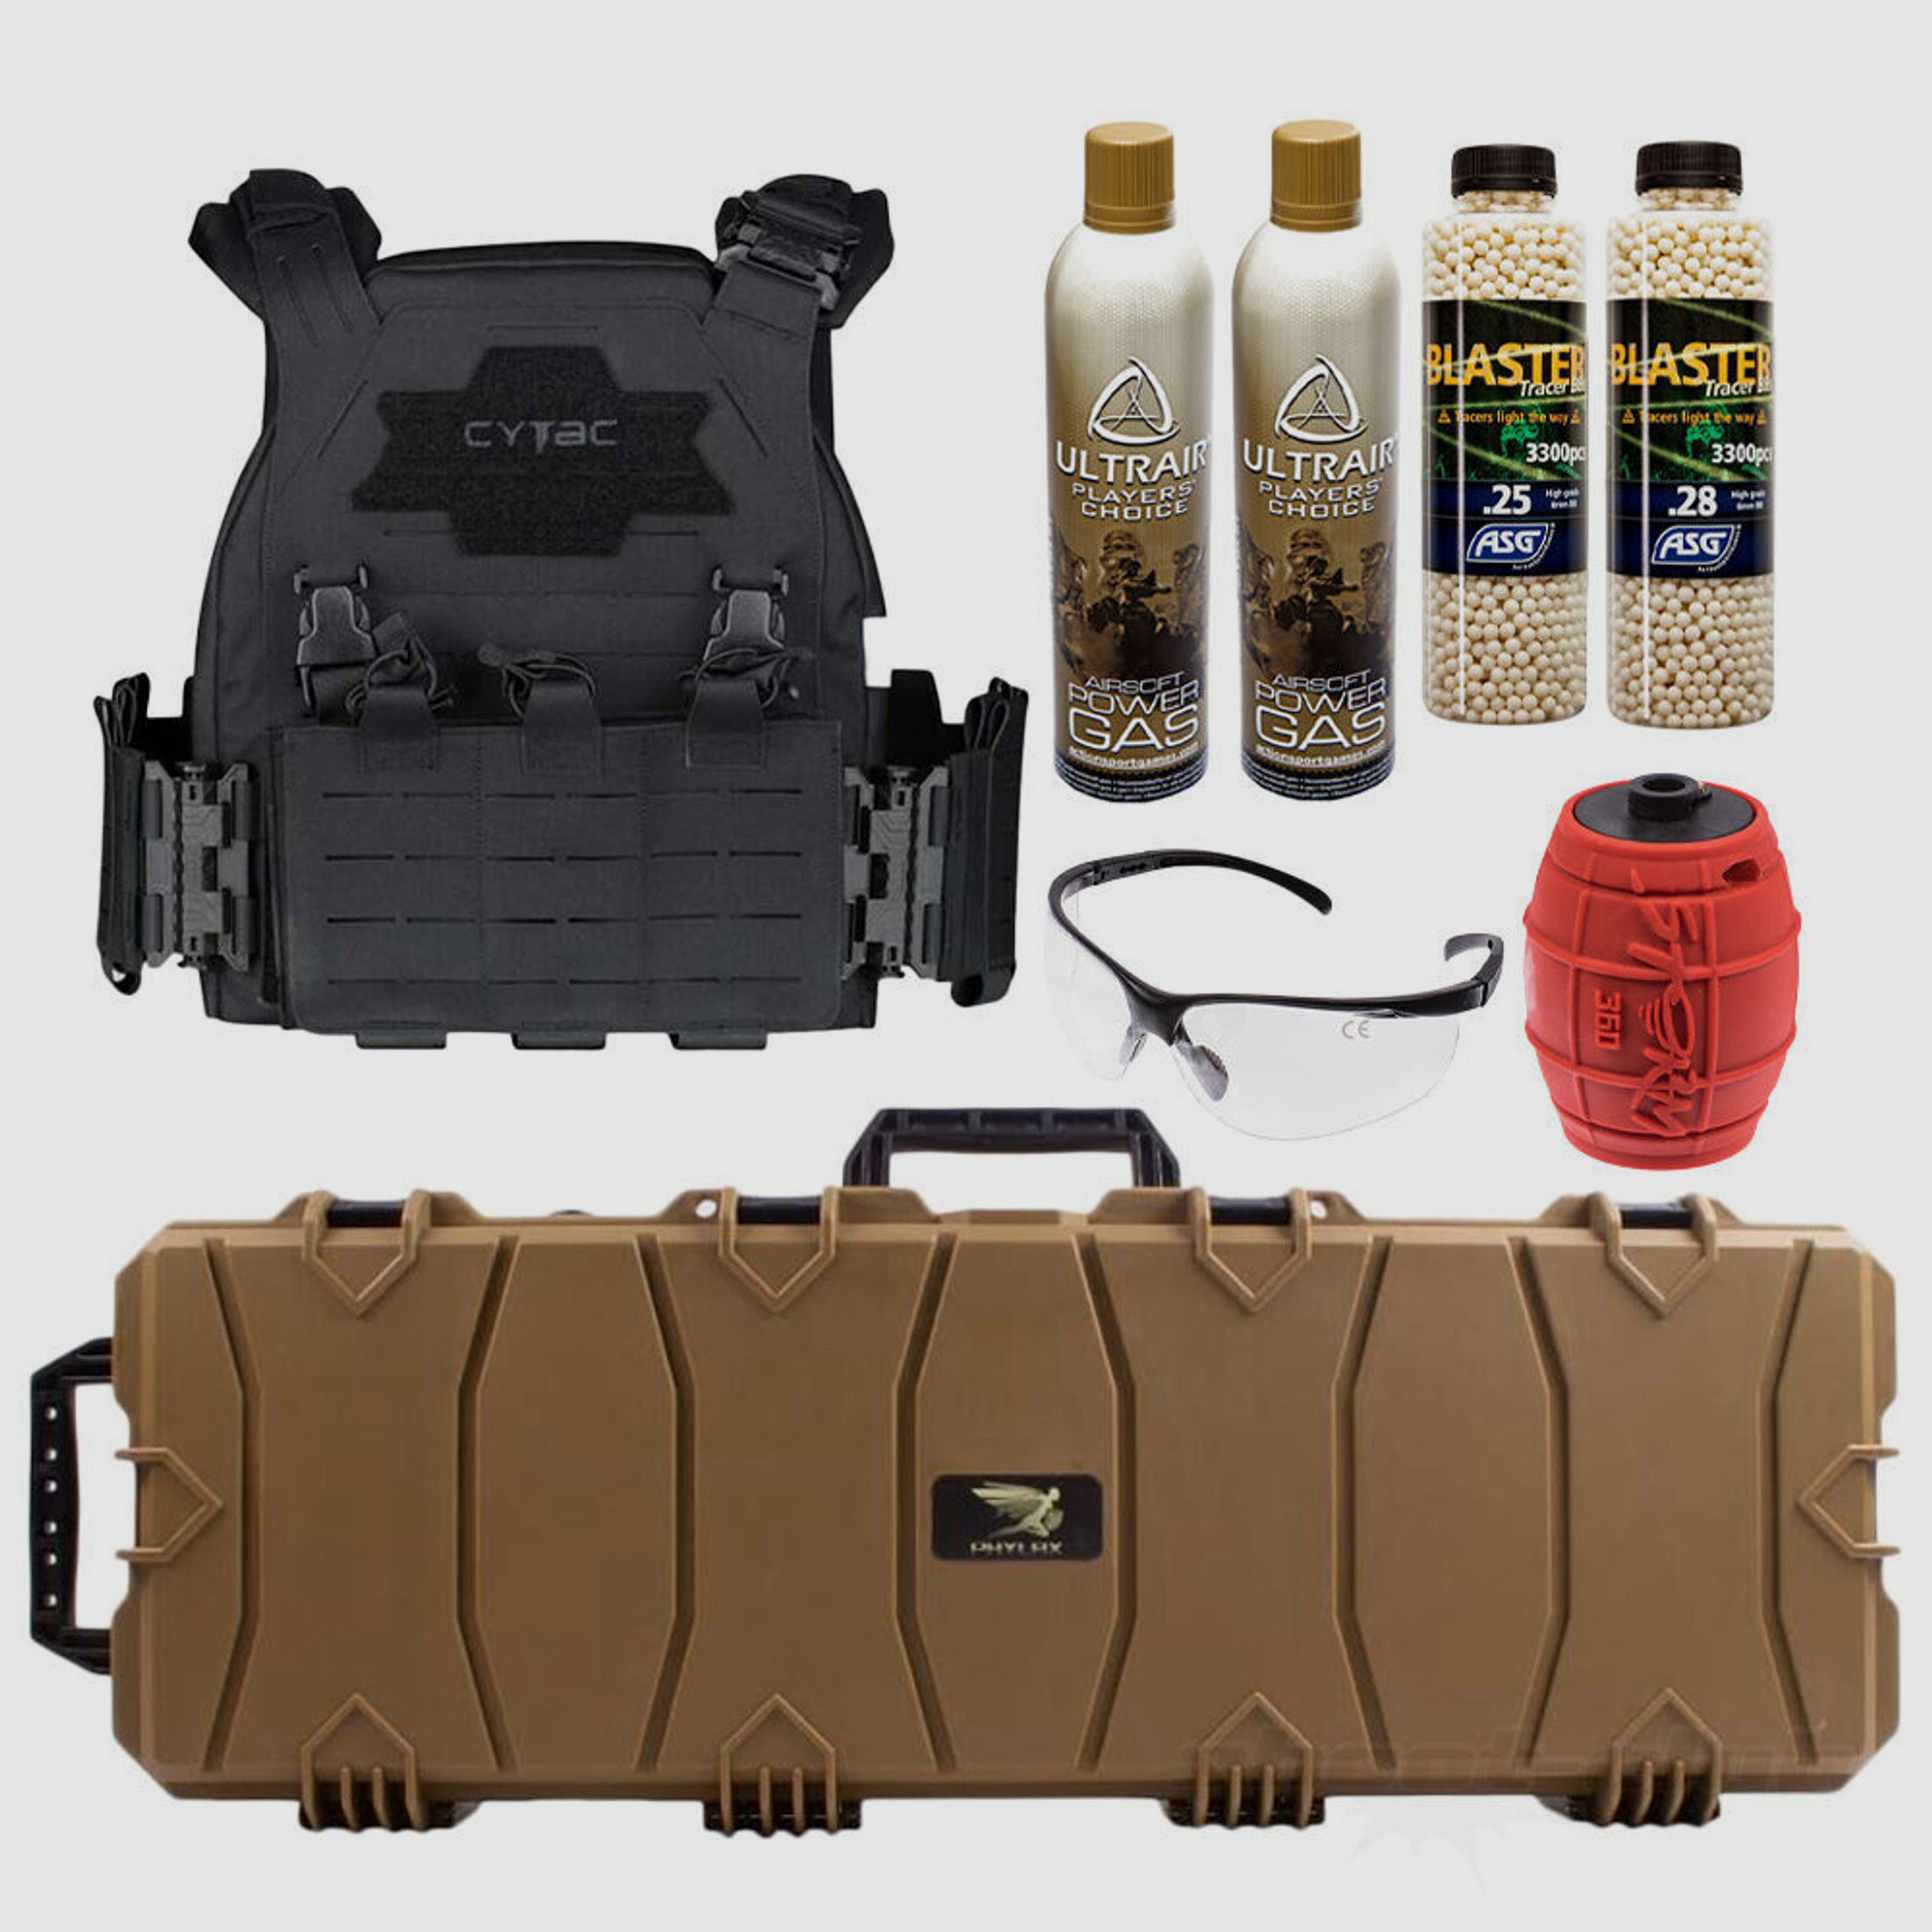 Phylax Waffenkoffer mit Cytac Plattenträger, Airsoftgas, Airsoftgranate